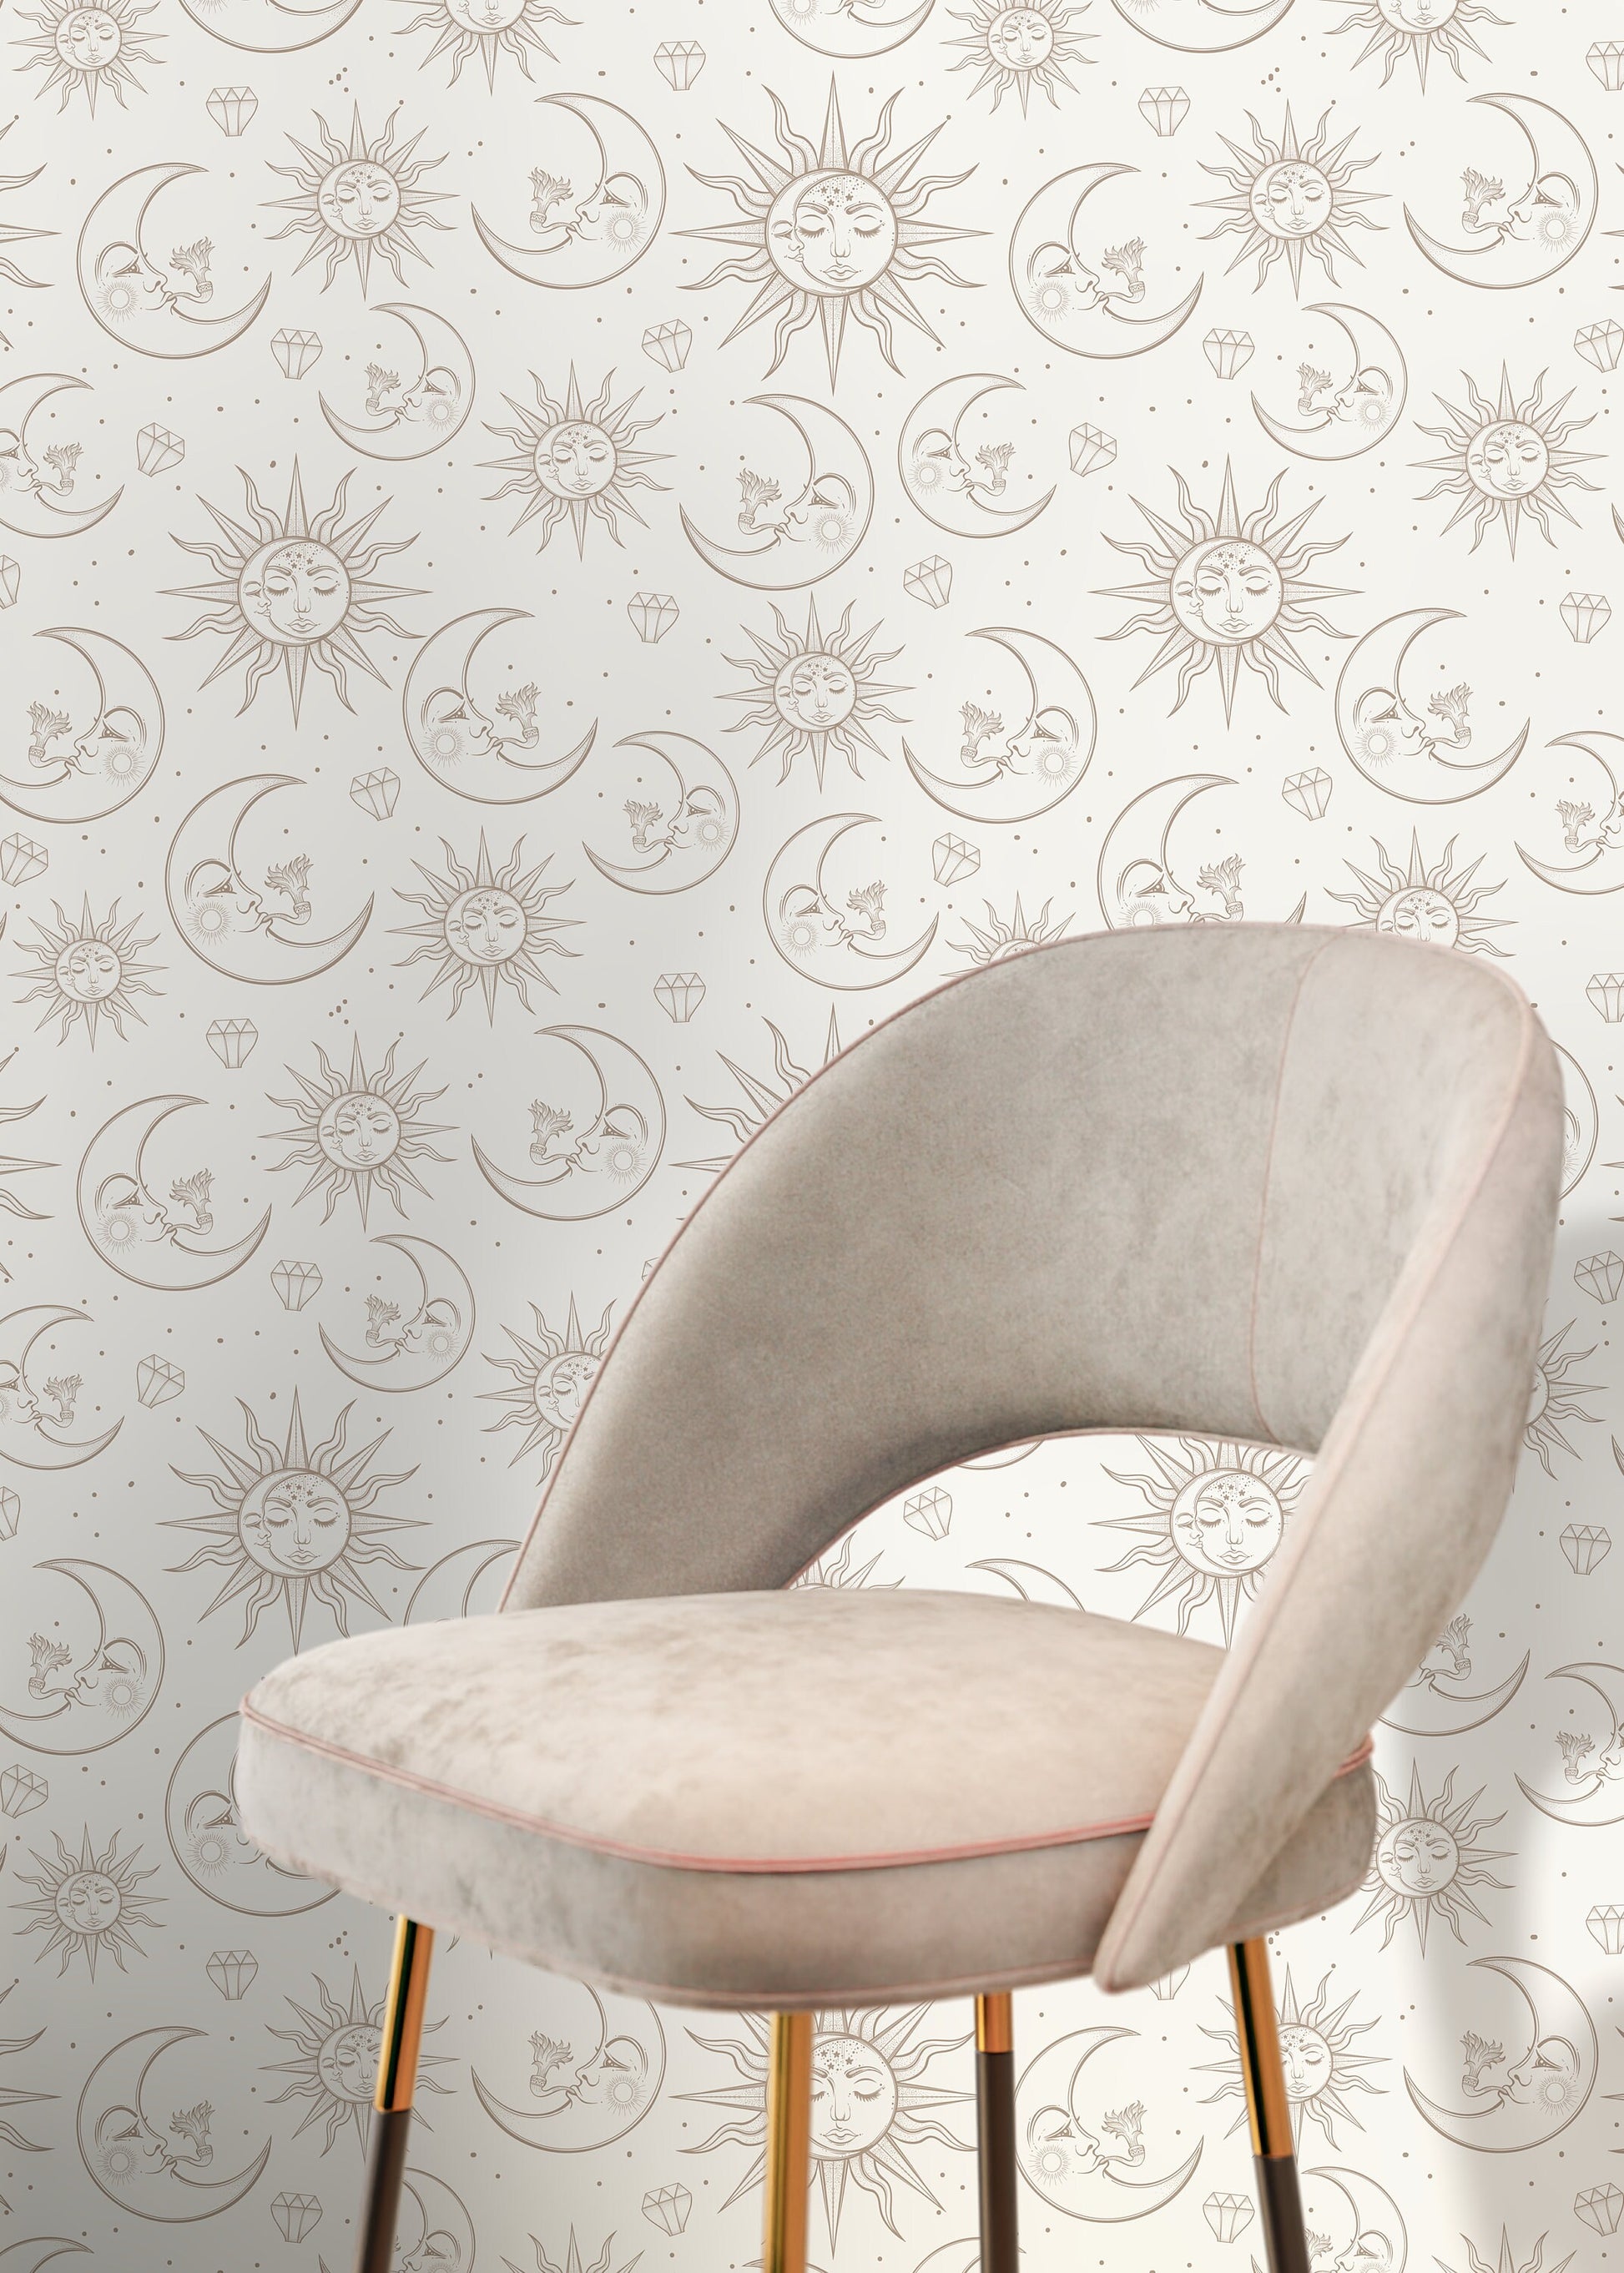 Beige Mystique and Celestial Wallpaper Removable Peel and Stick Wallpaper, Peel and Stick Wallpaper Moon and Sun - ZABA